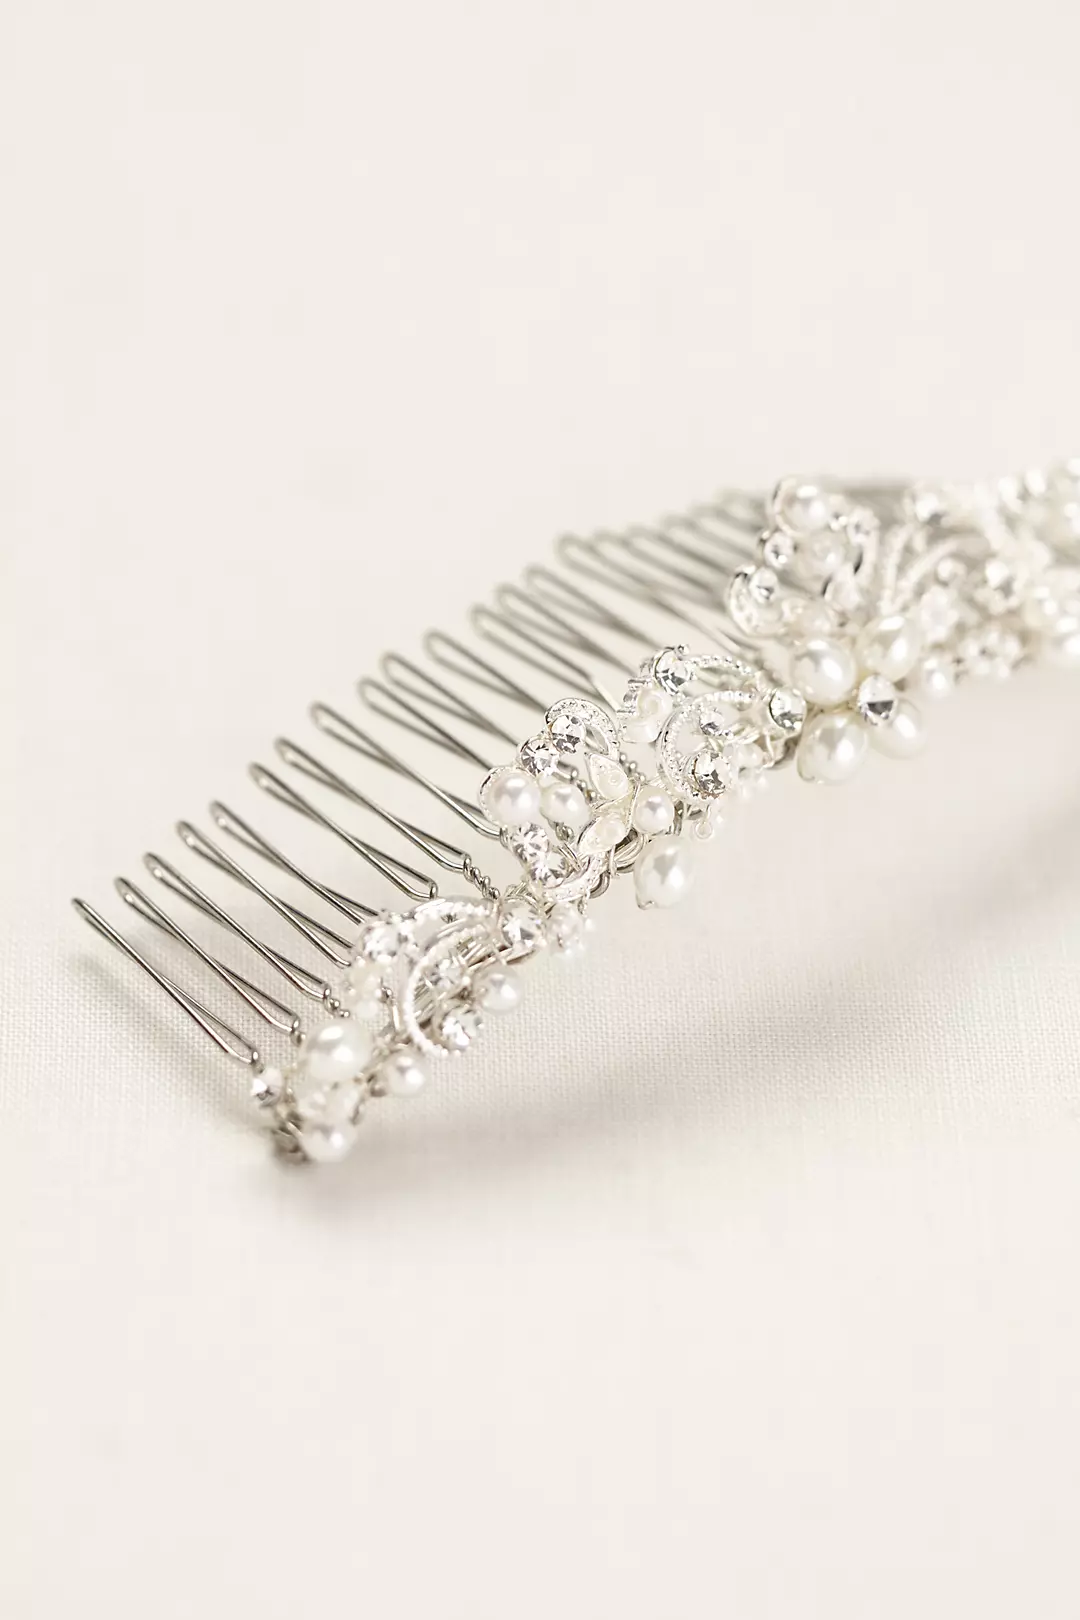 Bridal Comb with Scroll Detail, Pearls and Crystal Image 3